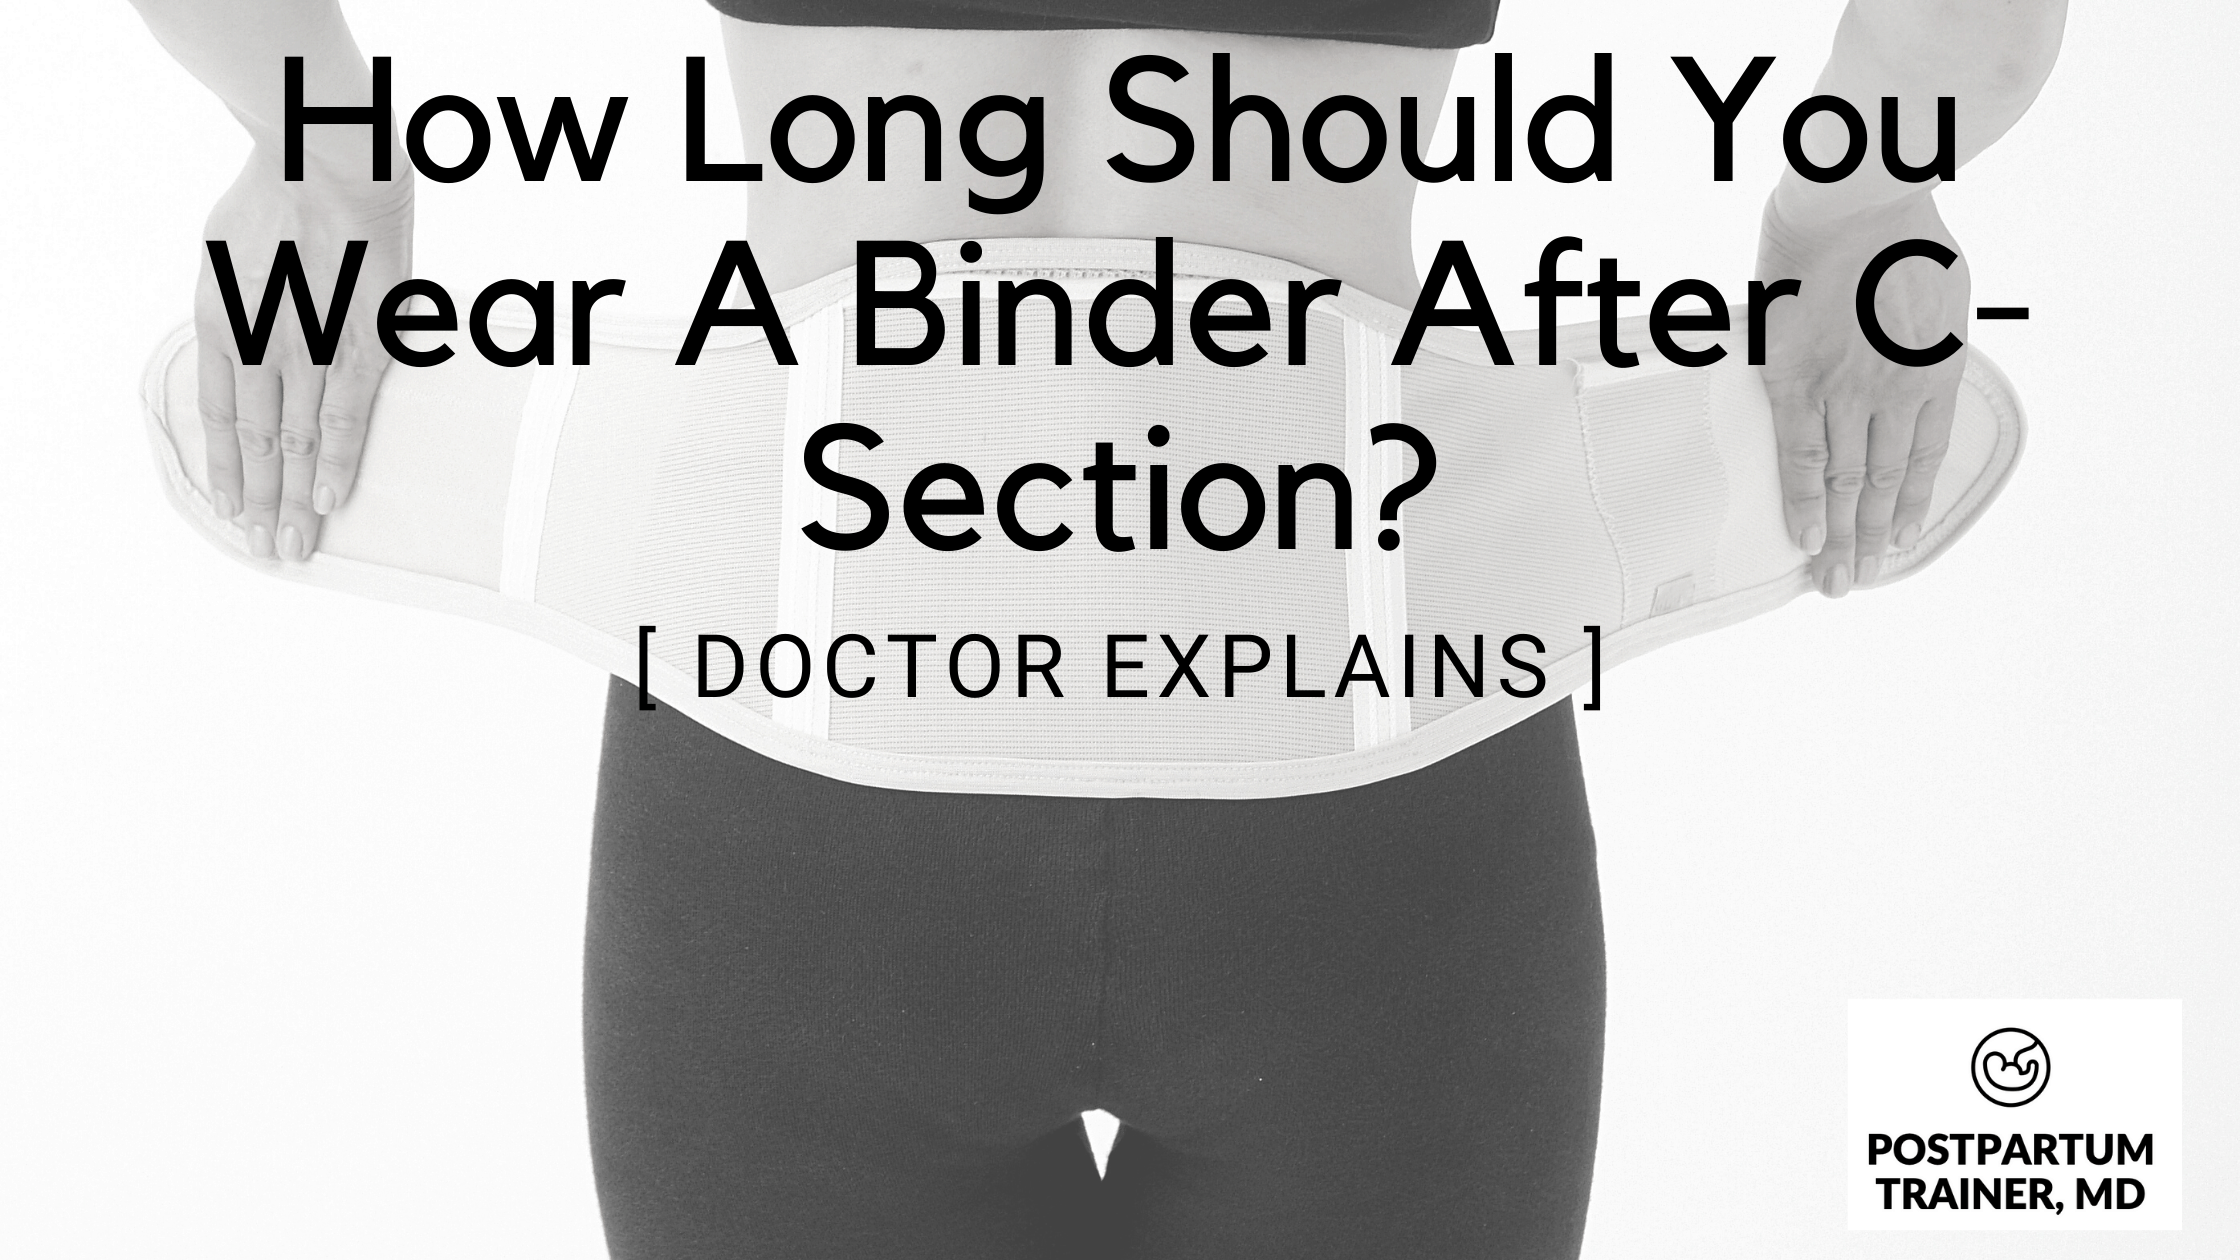 A Binder After C-Section 